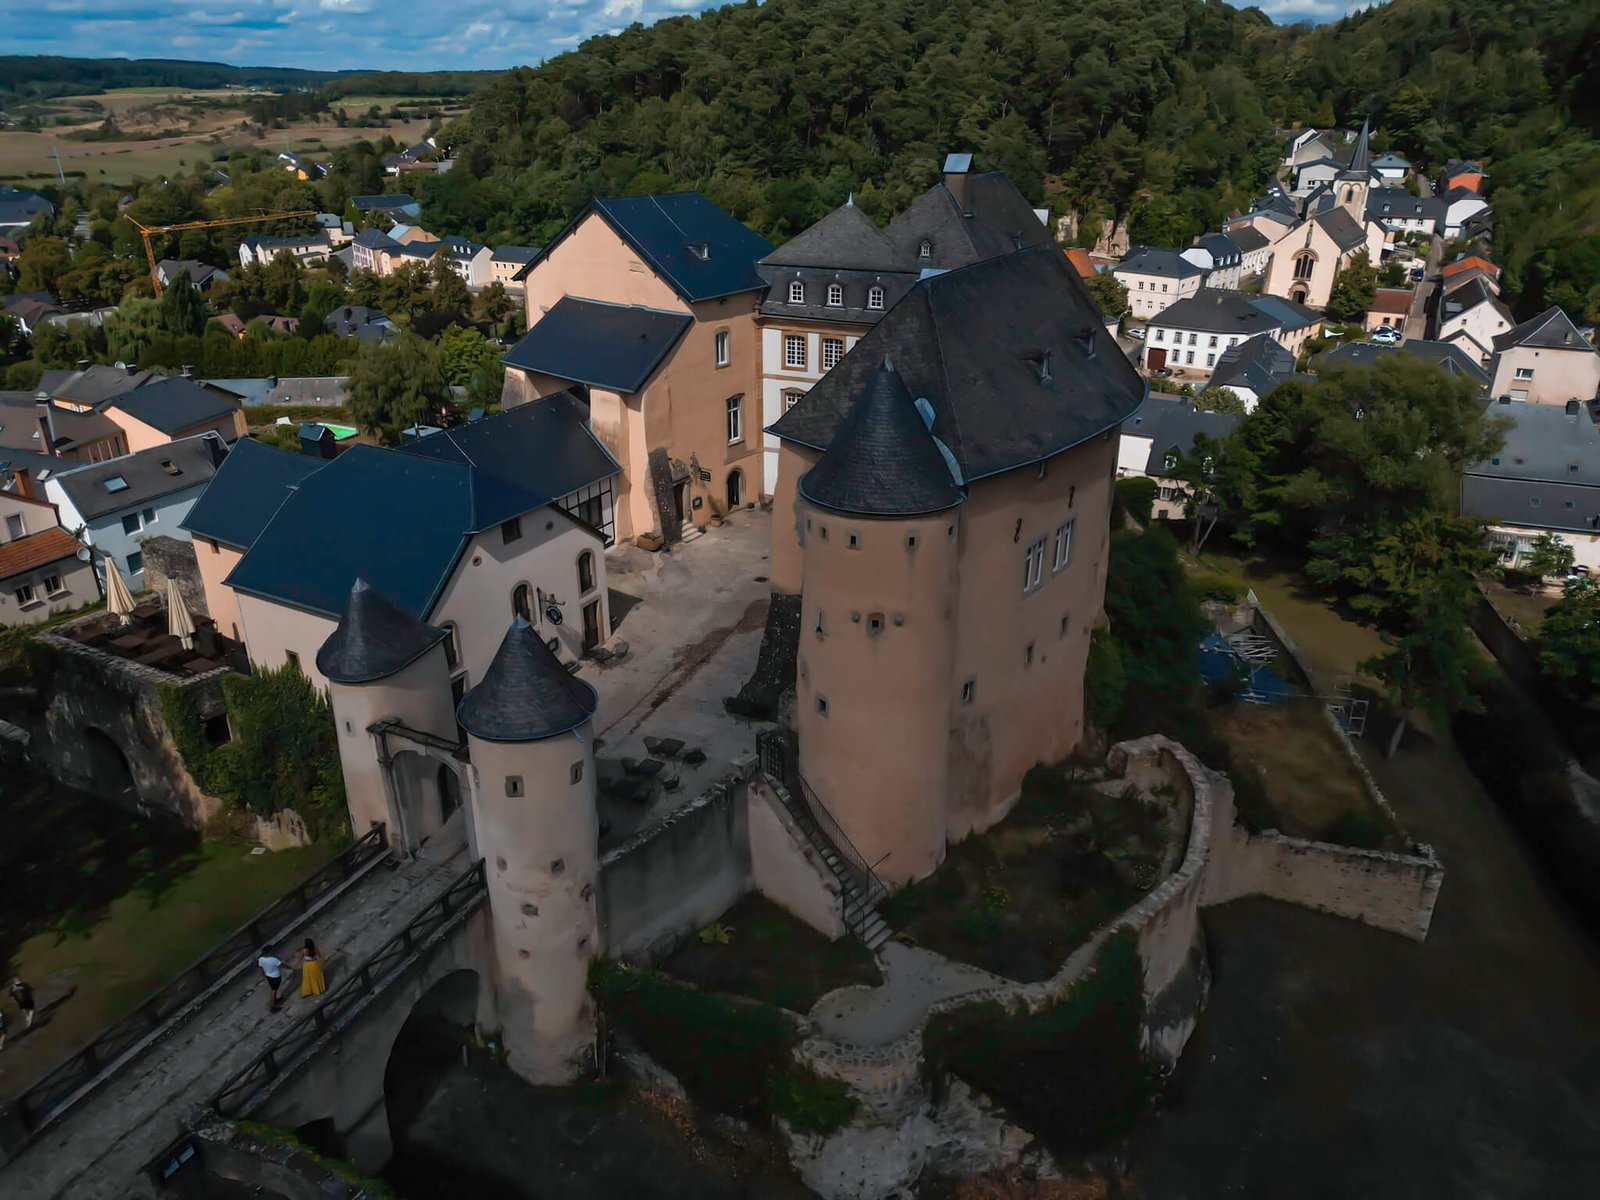 Bourlingster castle, things to do while visiting Luxembourg